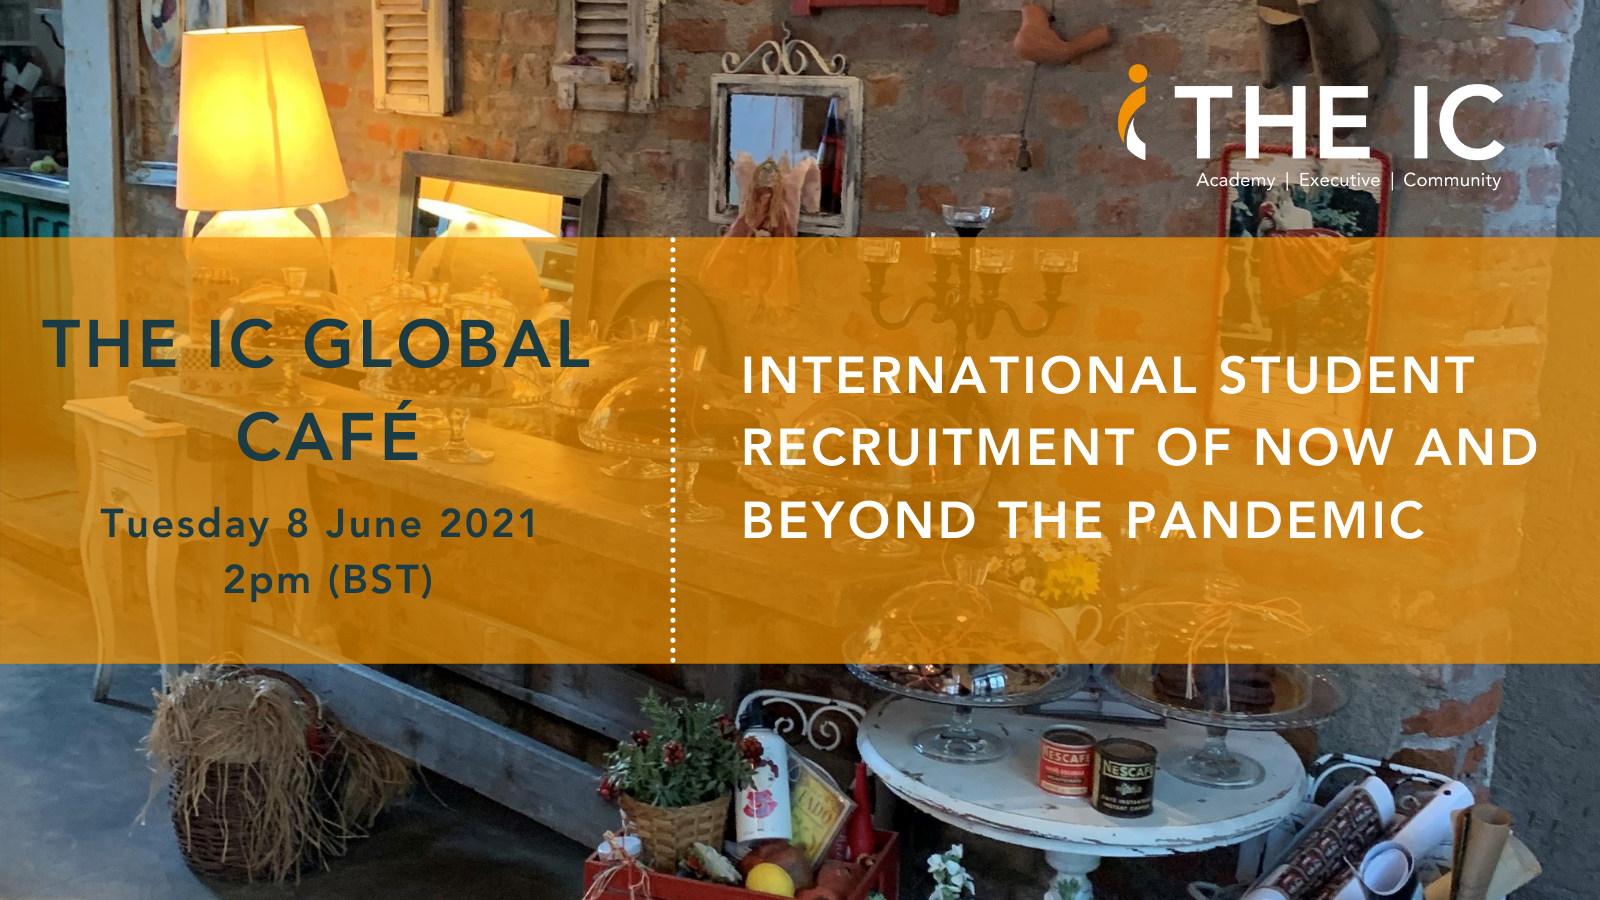 The IC Global Café: International Student Recruitment of NOW and beyond the pandemic.